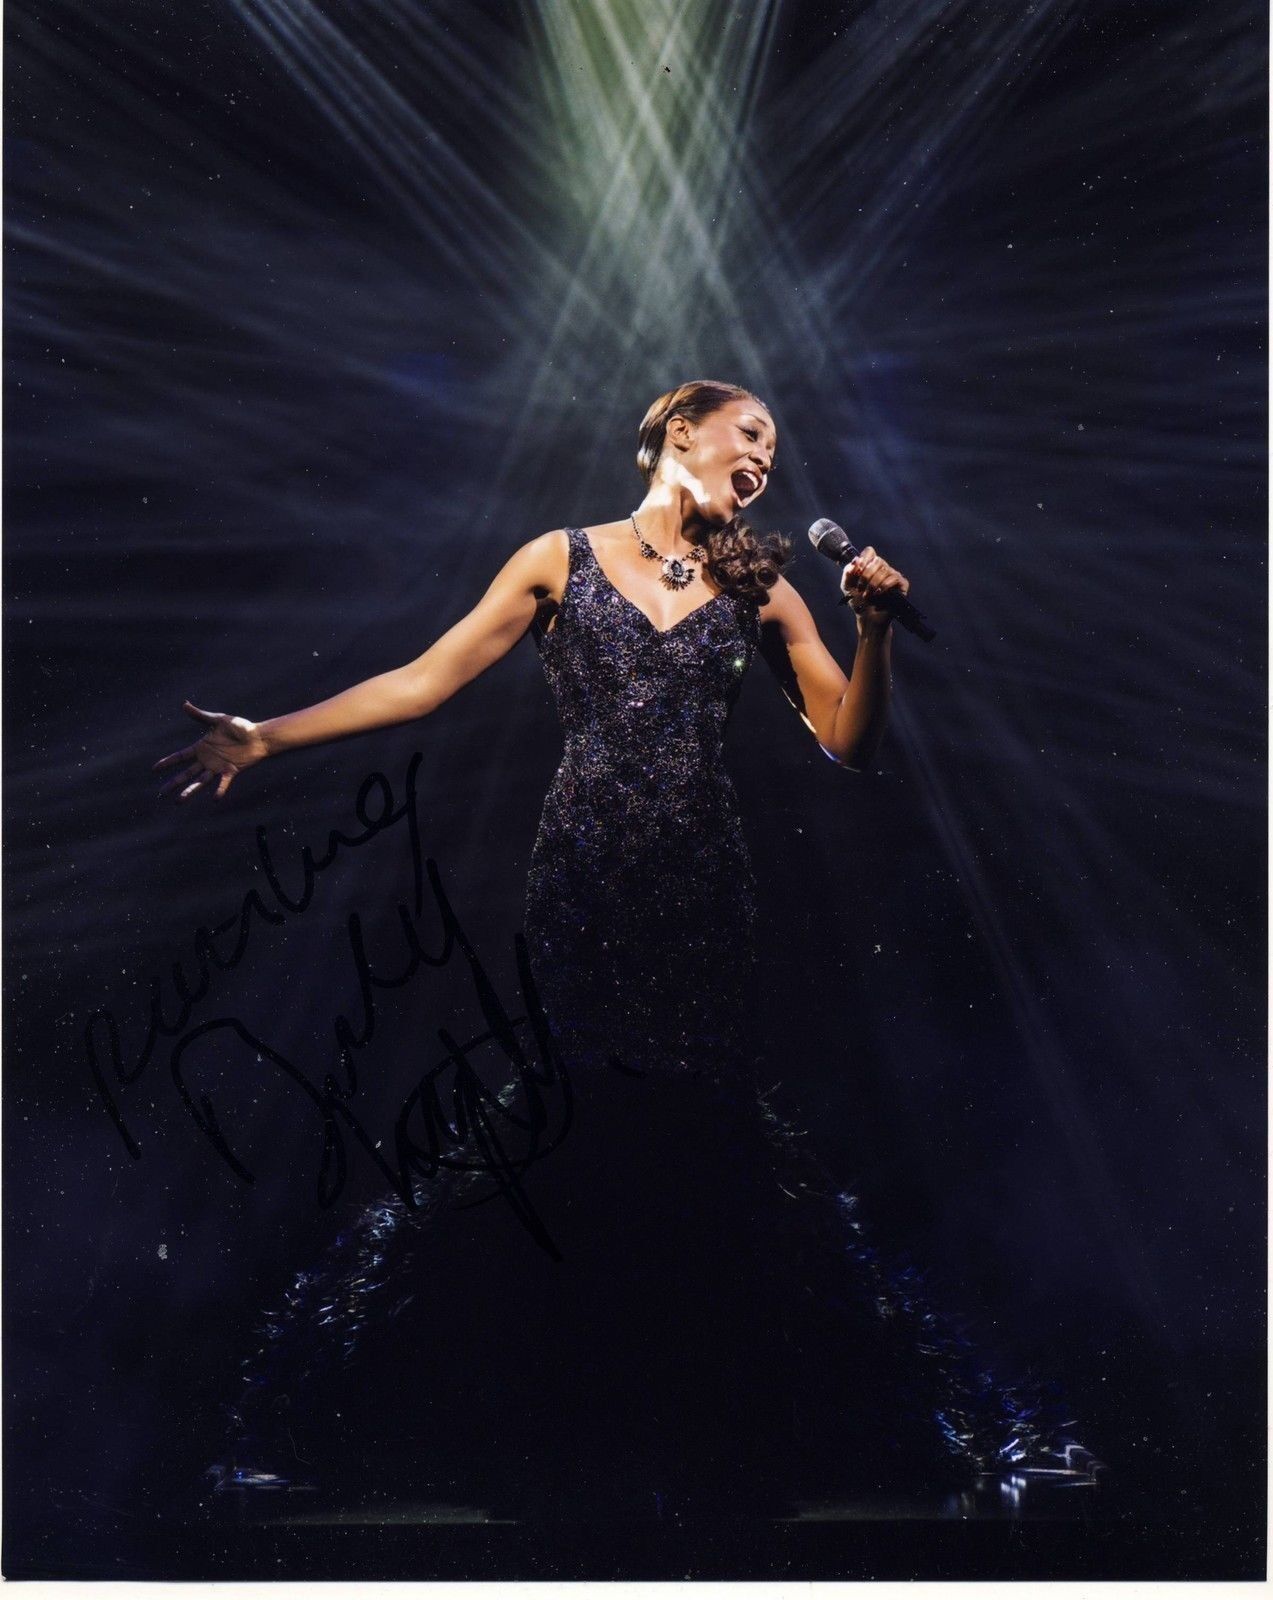 Beverley Knight Autograph Signed 10x8 Photo AFTAL [A0116]